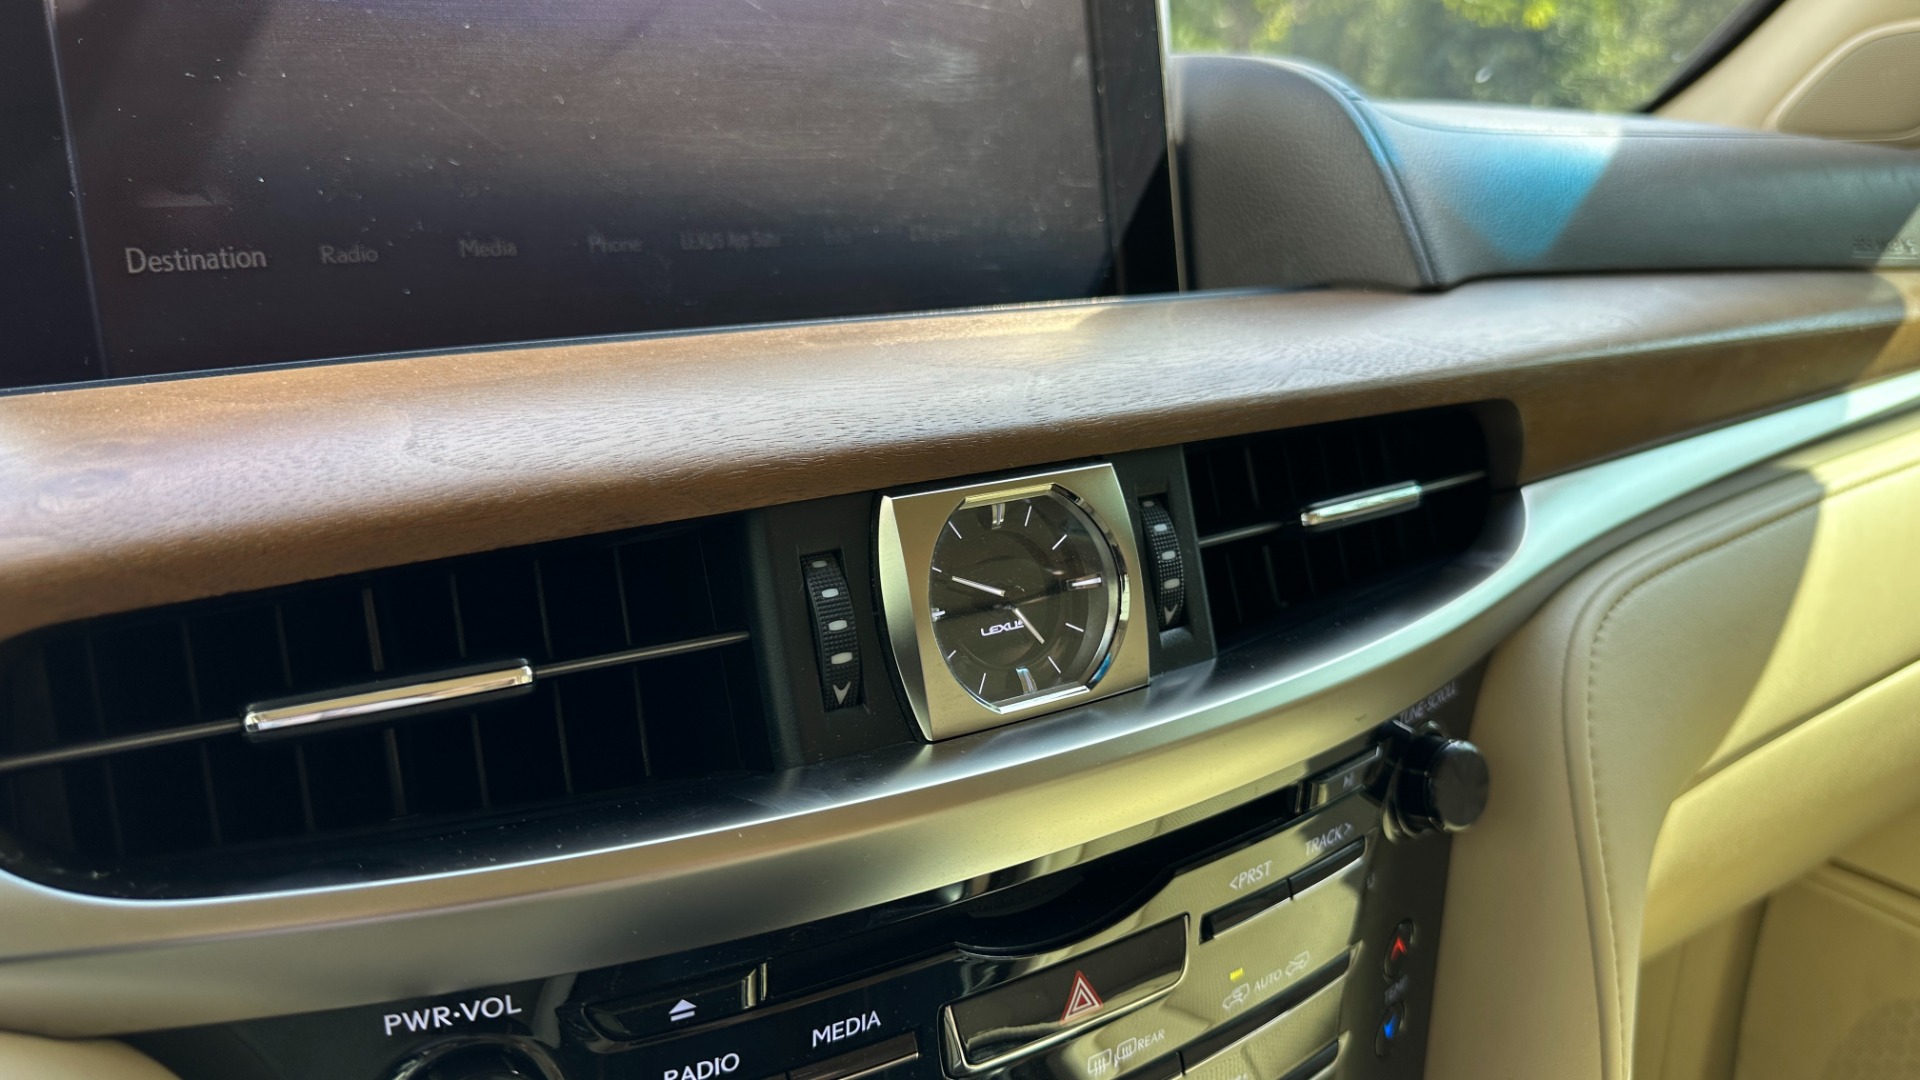 Used 2017 Lexus LX LX 570 LUXURY / MARK LEVINSON / REAR DVD SCREENS / 3 ROW / 4WD for sale $46,995 at Formula Imports in Charlotte NC 28227 26